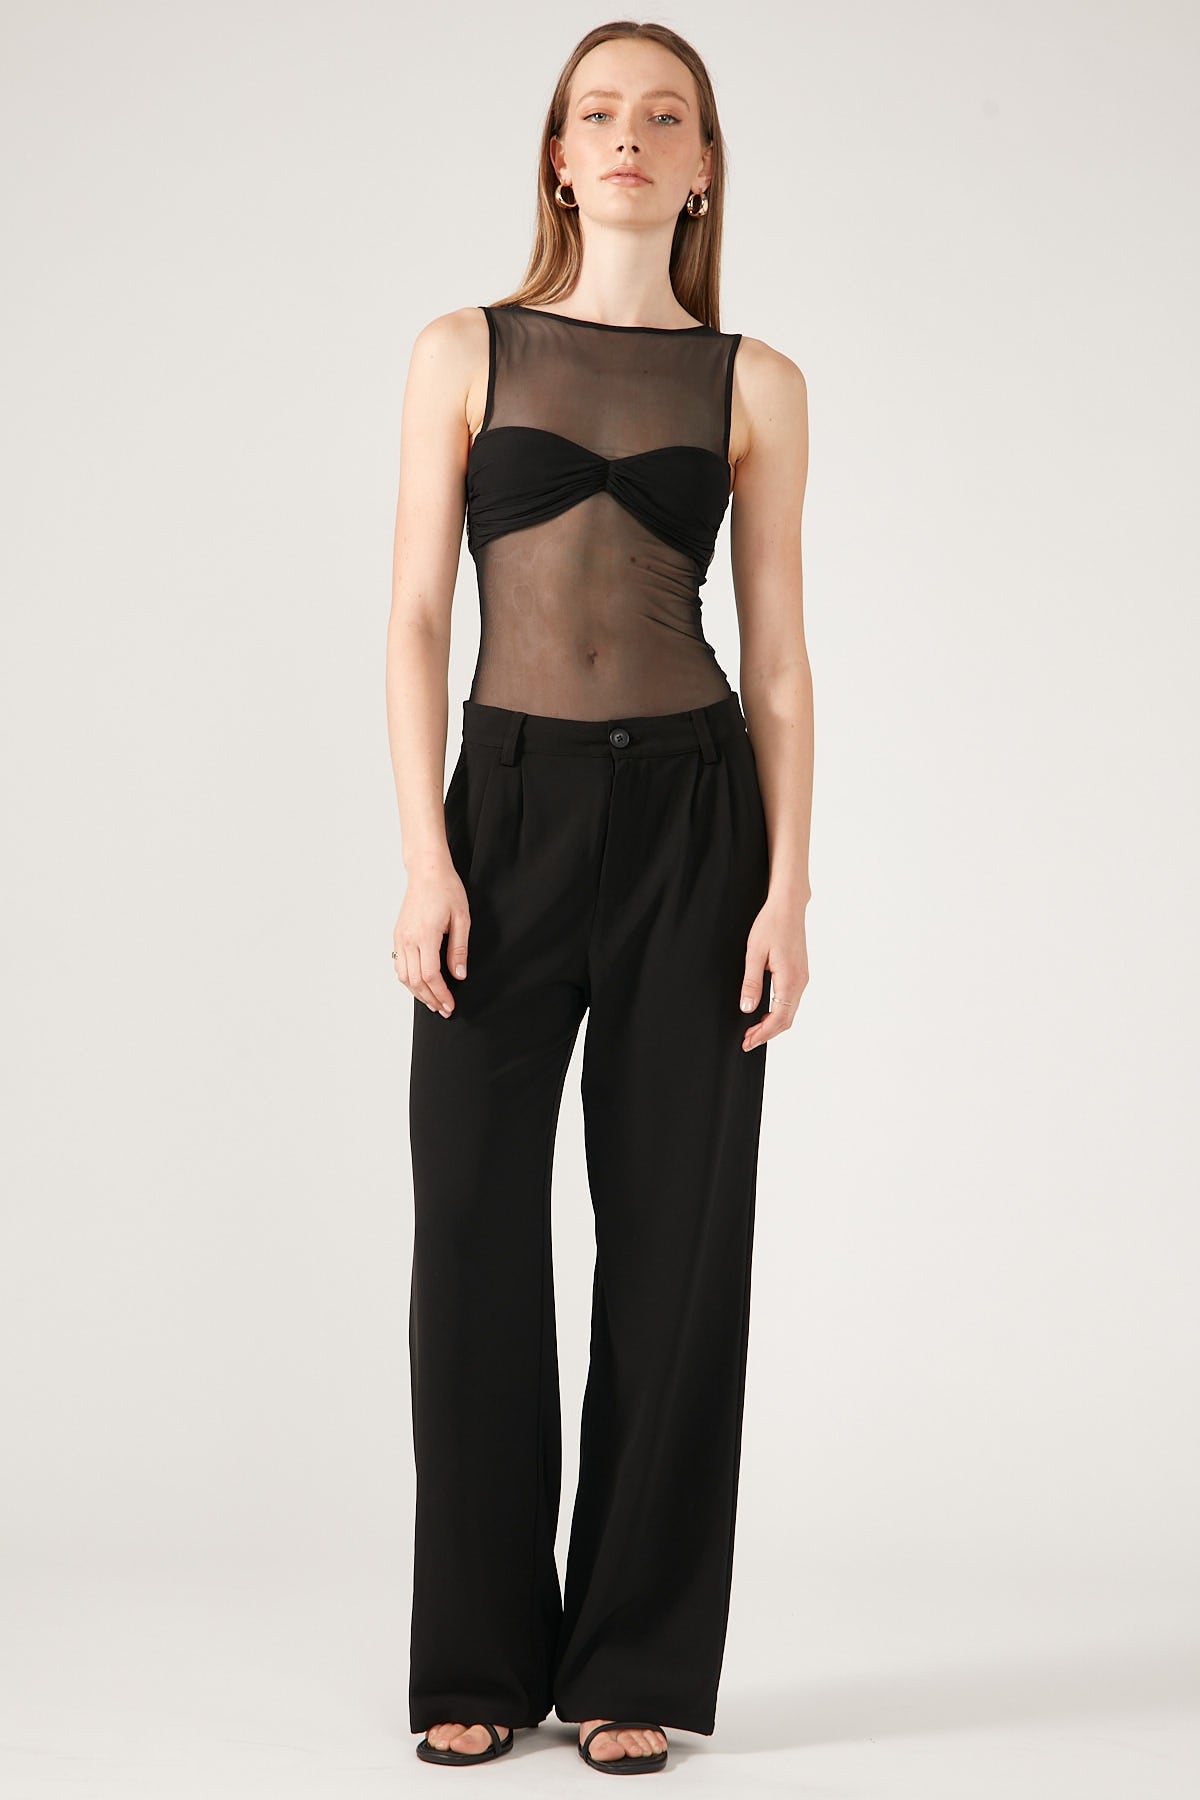 Perfect Stranger Twisted Mesh Top Black